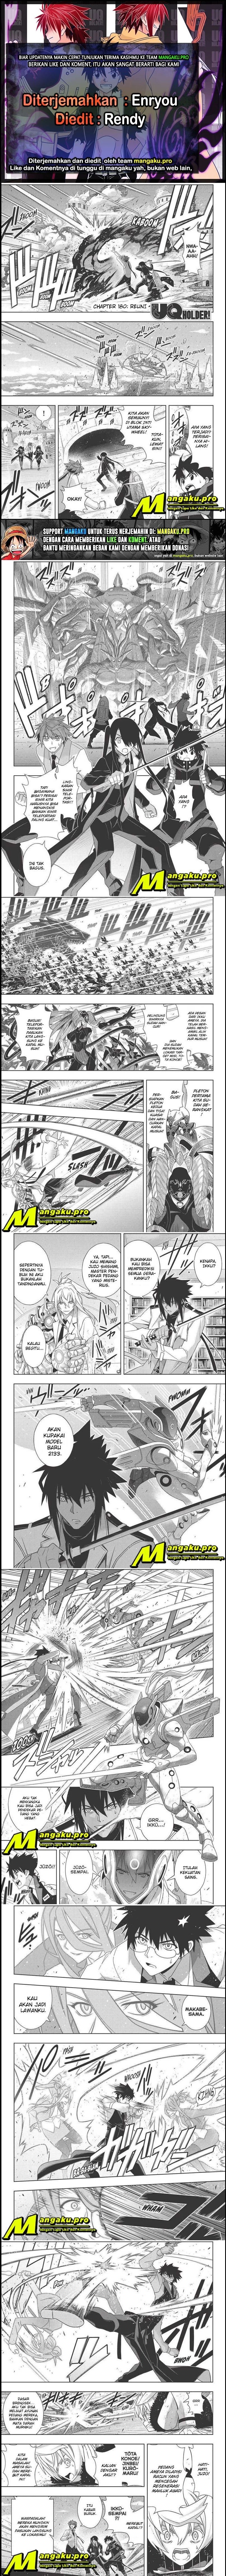 UQ Holder!: Chapter  180.1  - Page 1